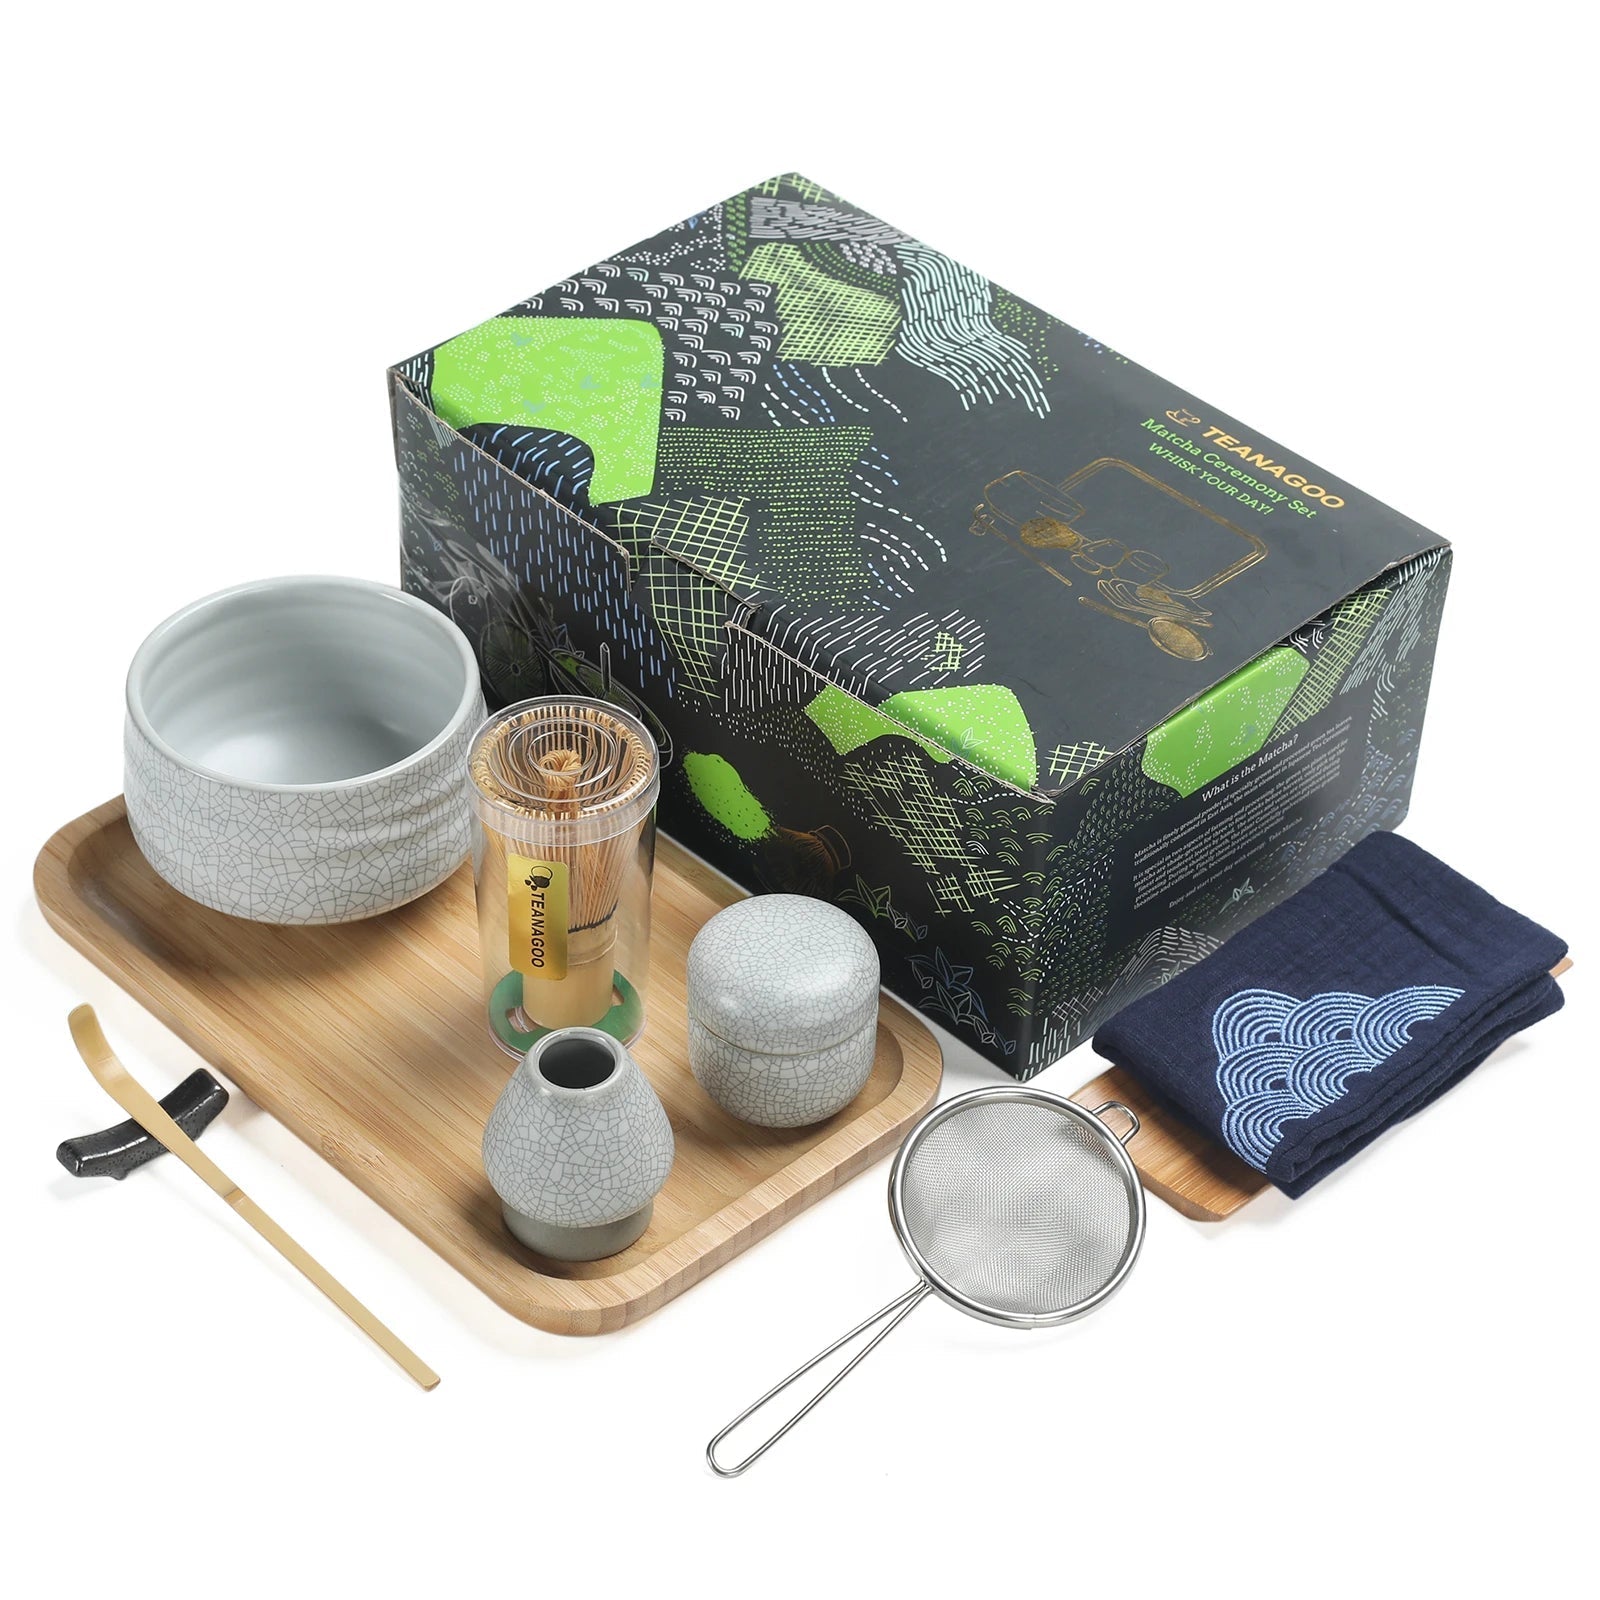 Handmade Home Easy Clean Matcha Tea Set Tool Stand Kit Bowl Whisk Scoop  Gift Ceremony Traditional